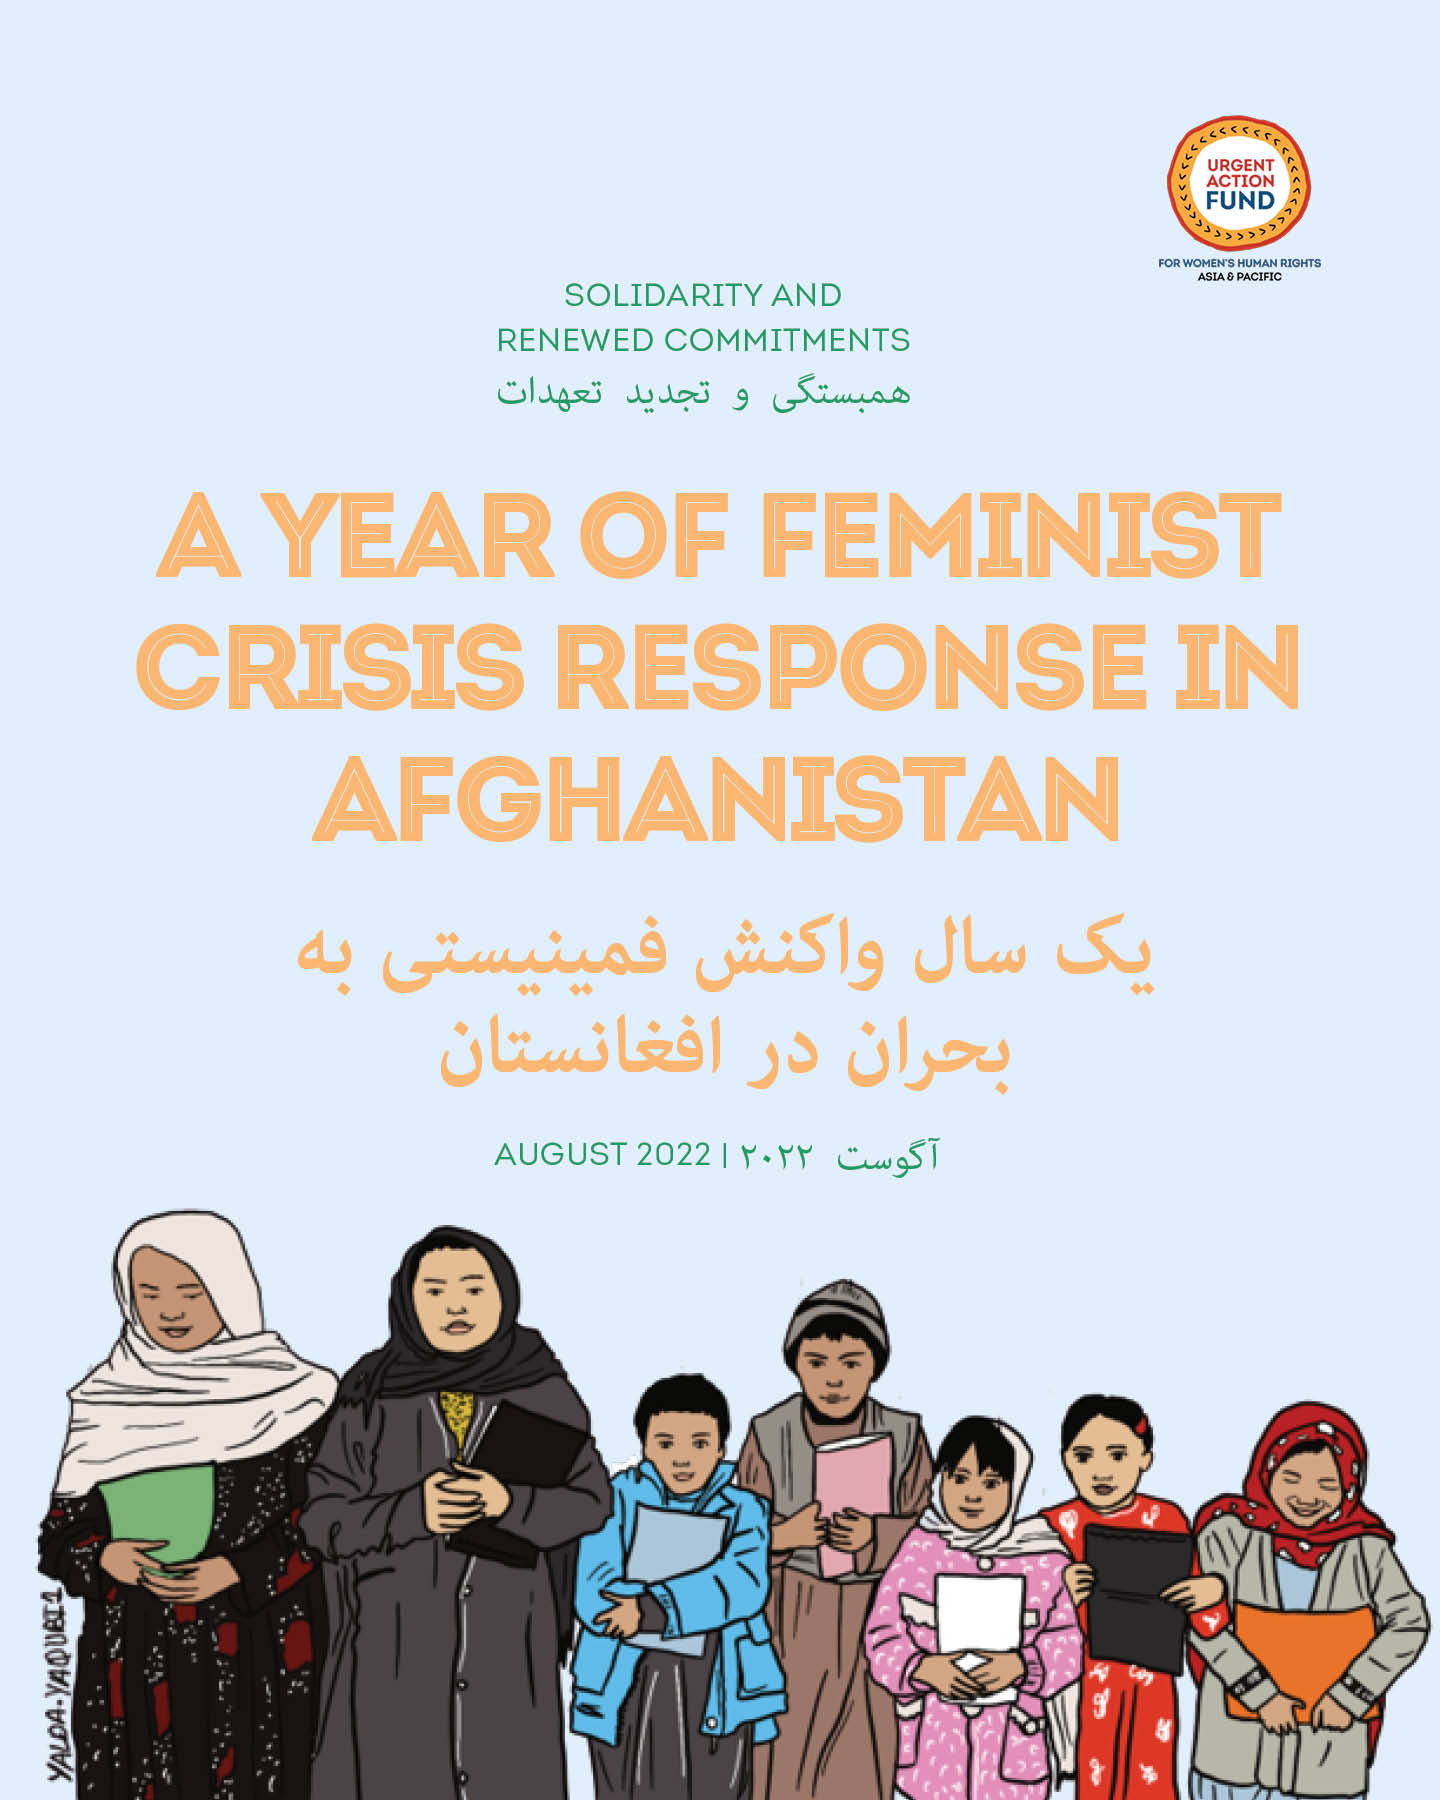  One Year of Feminist Crisis Response in Afghanistan - August 2022.